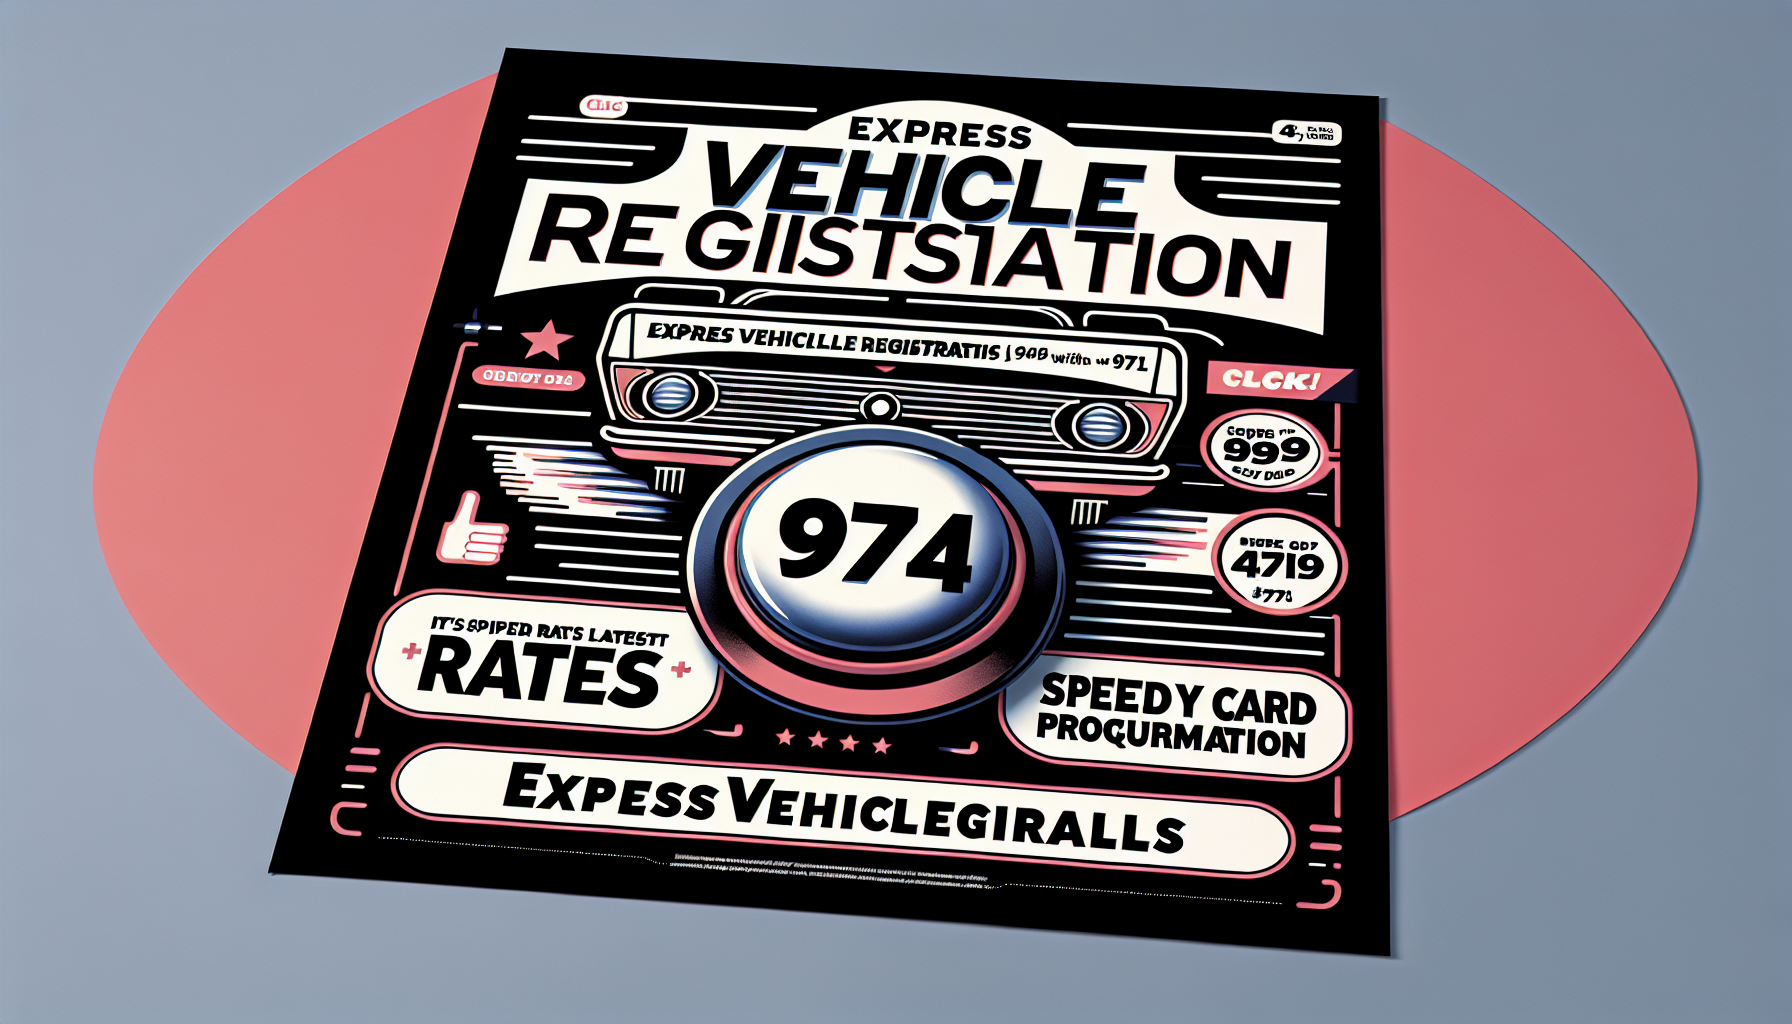 get fast and hassle-free 974 vehicle registration with carte grise express 974. check out our competitive rates for quick and efficient processing.